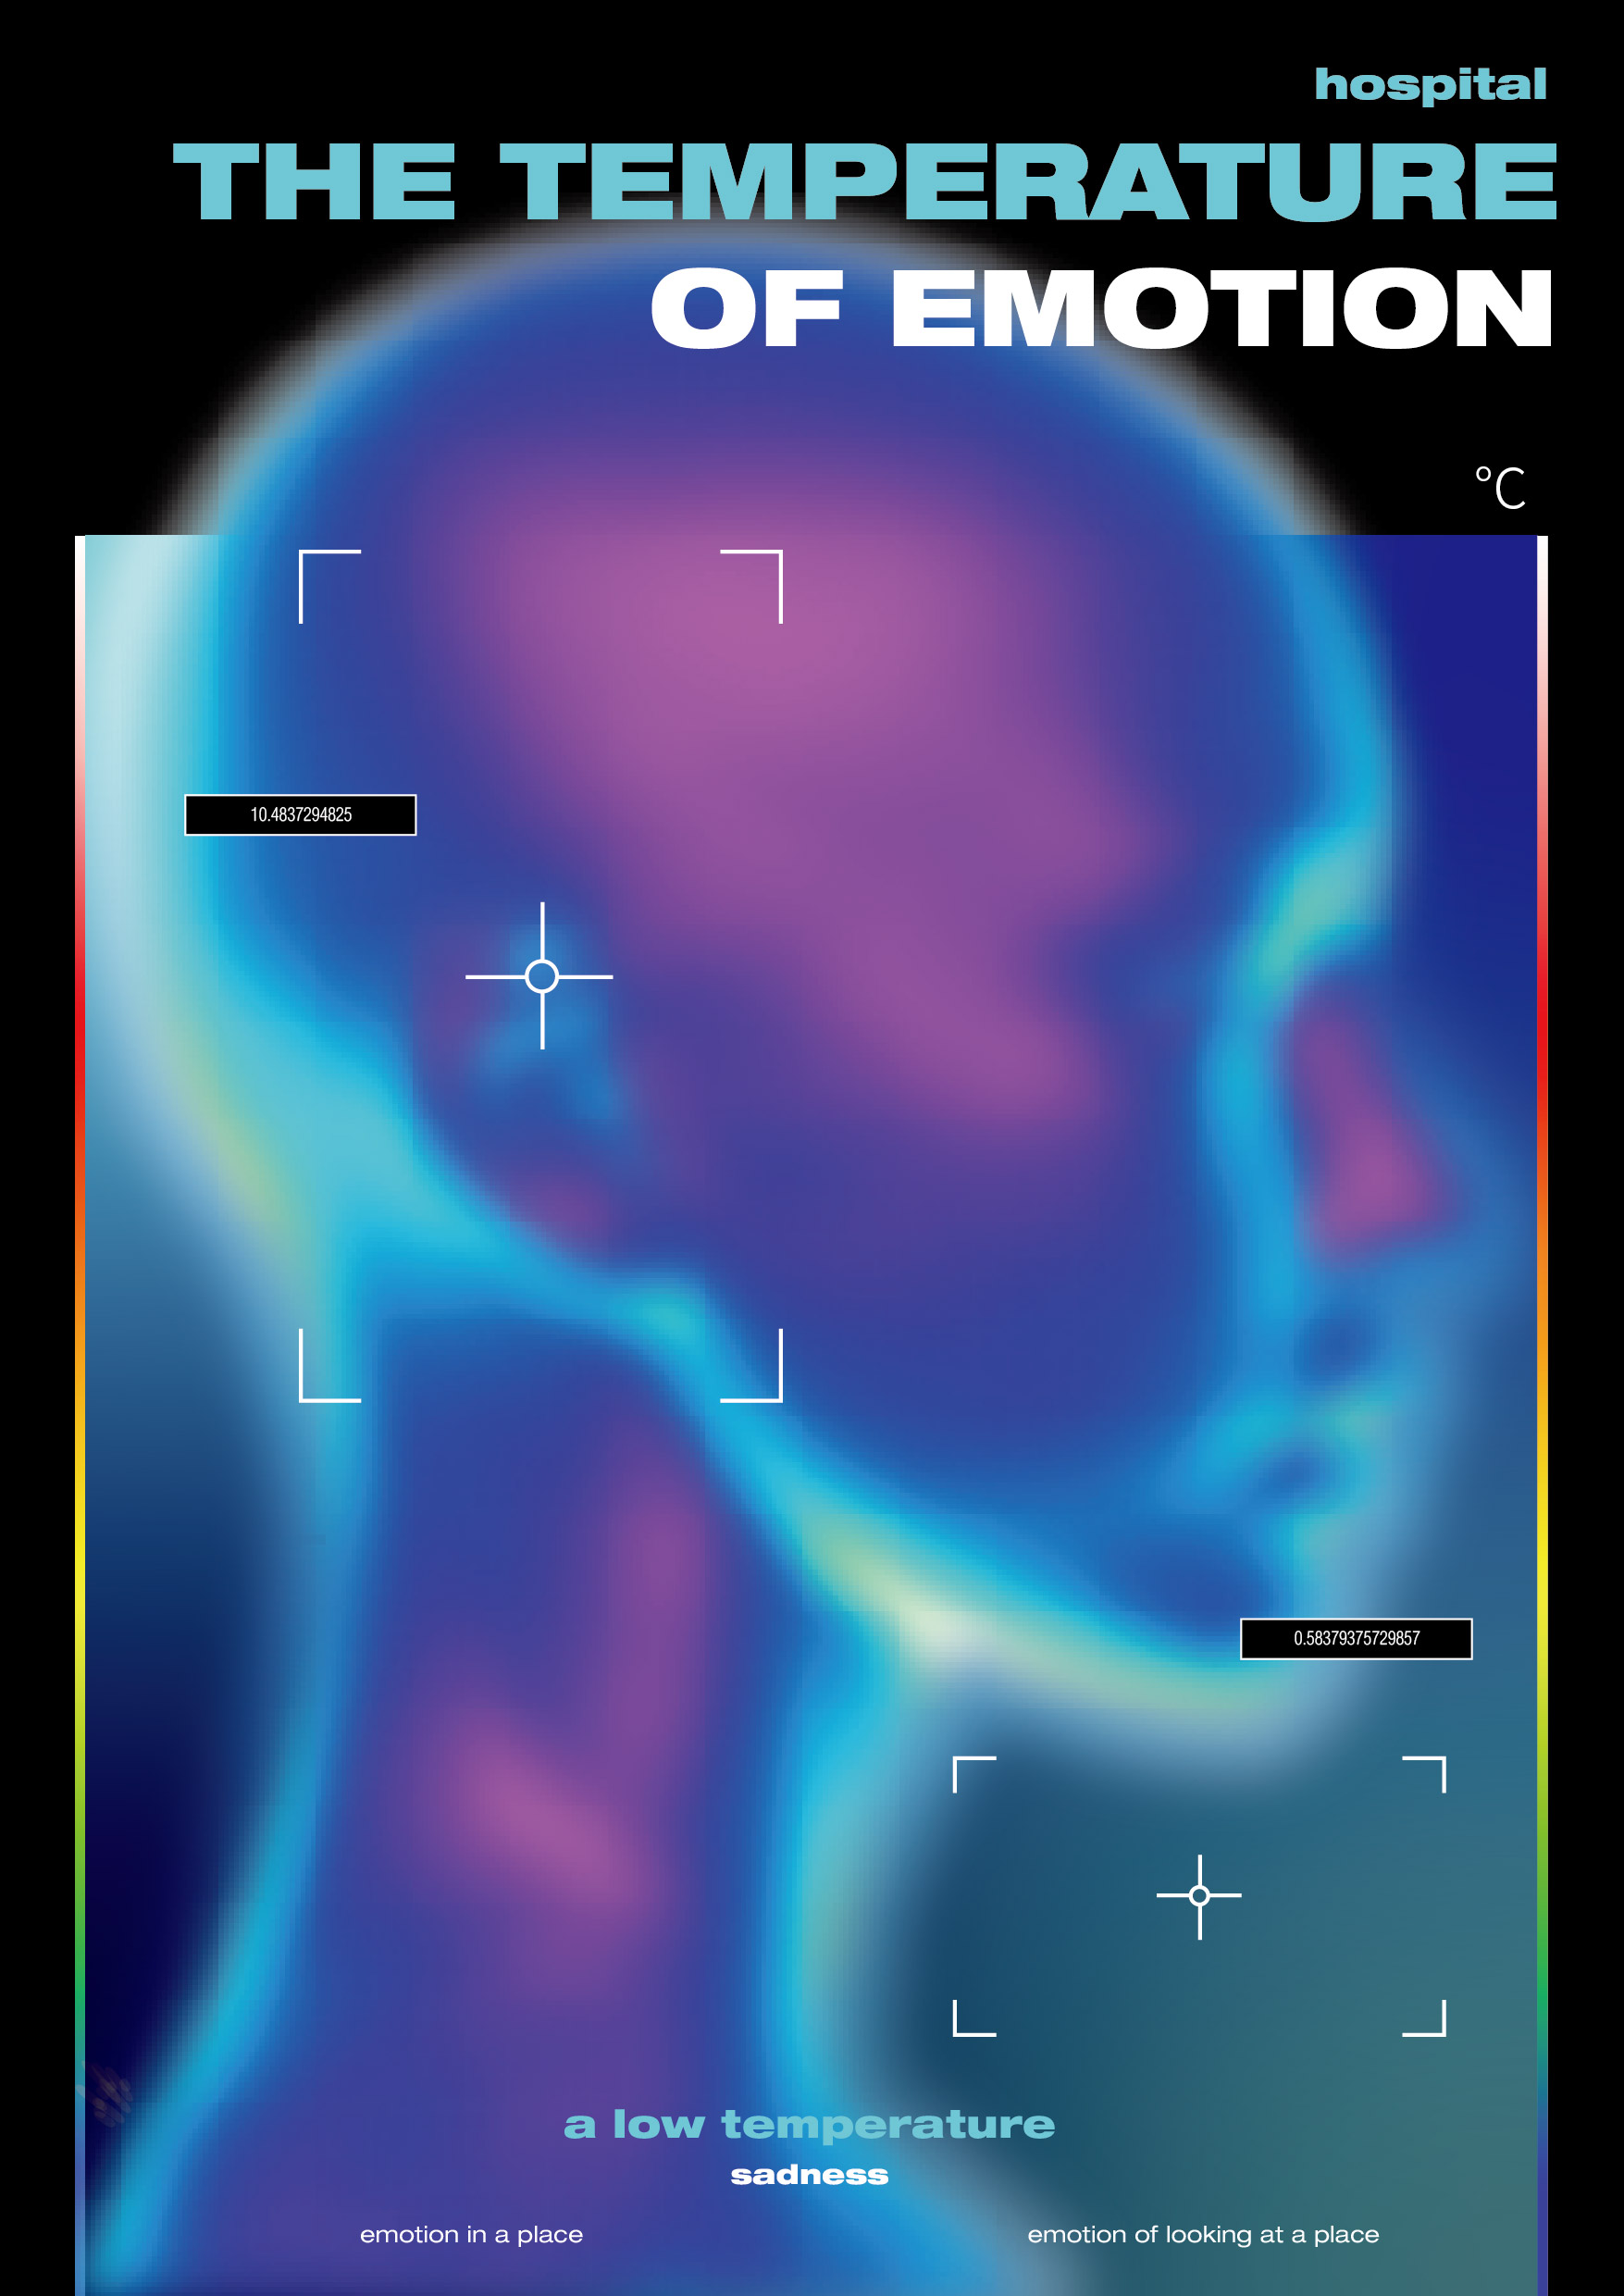 THE TEMPERATURE OF EMOTION POSTER 03